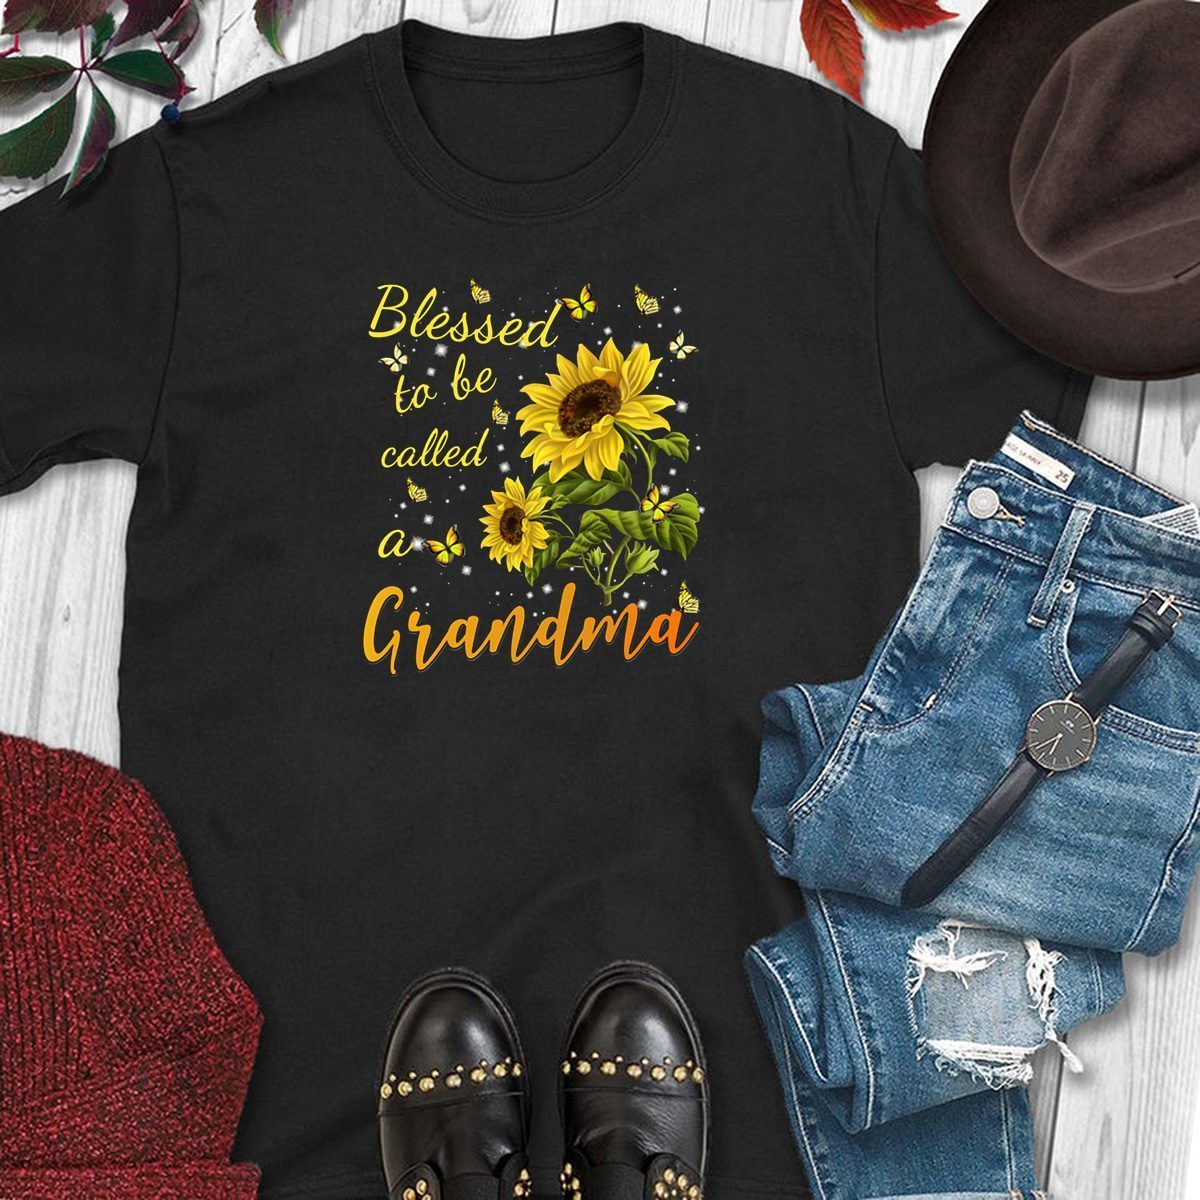 Sunflower blessed to be called a grandma shirt - OrderQuilt.com